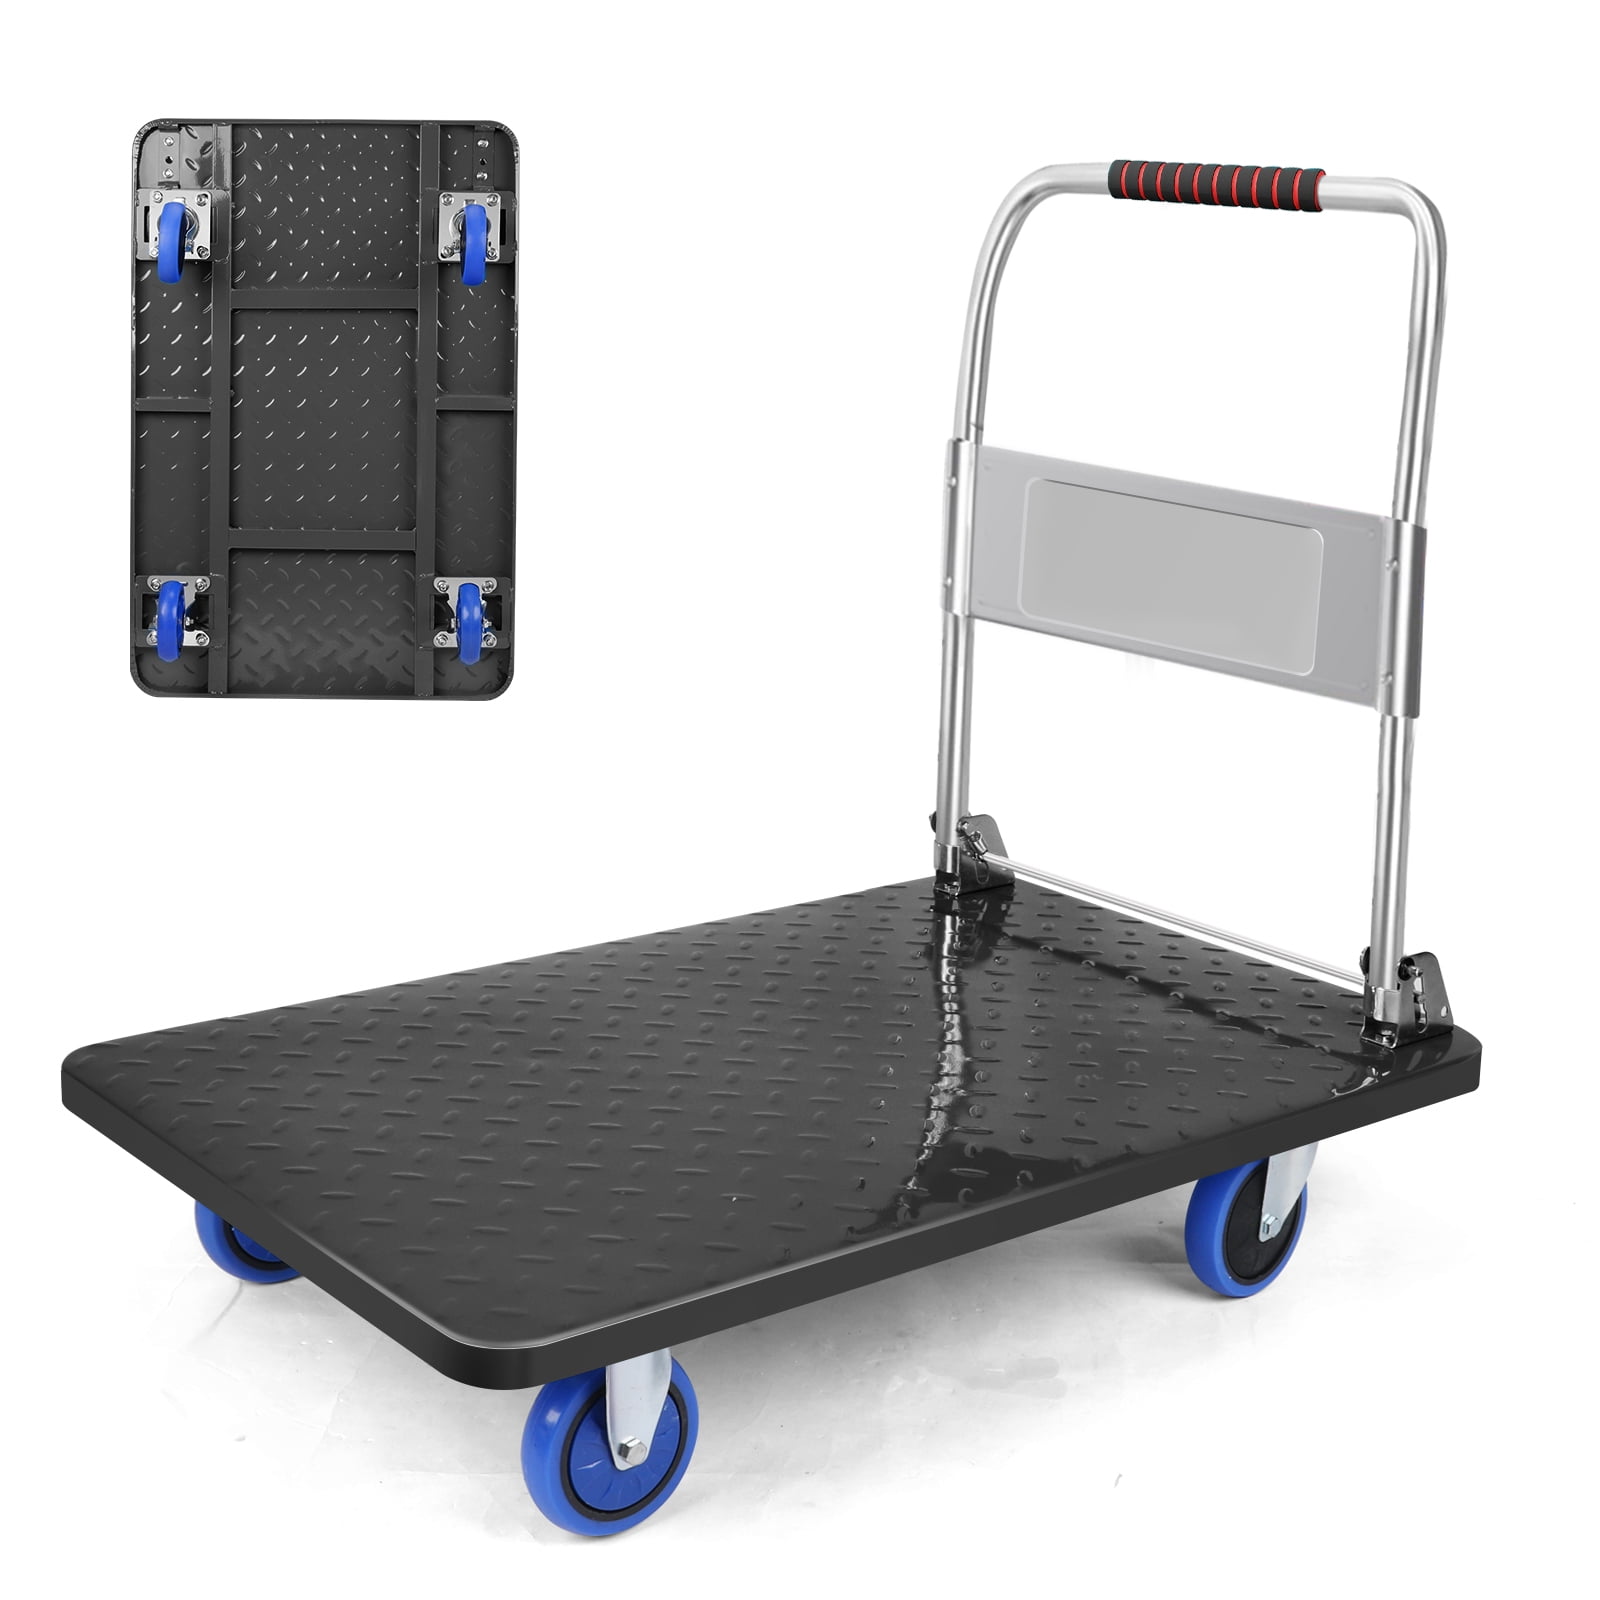 Dropship Extra Large Foldable Push Cart,Heavy Duty Capacity 660 Lbs,360  Degree Swivel Wheels,Foldable Push Hand Cart For Loading And Storage to  Sell Online at a Lower Price